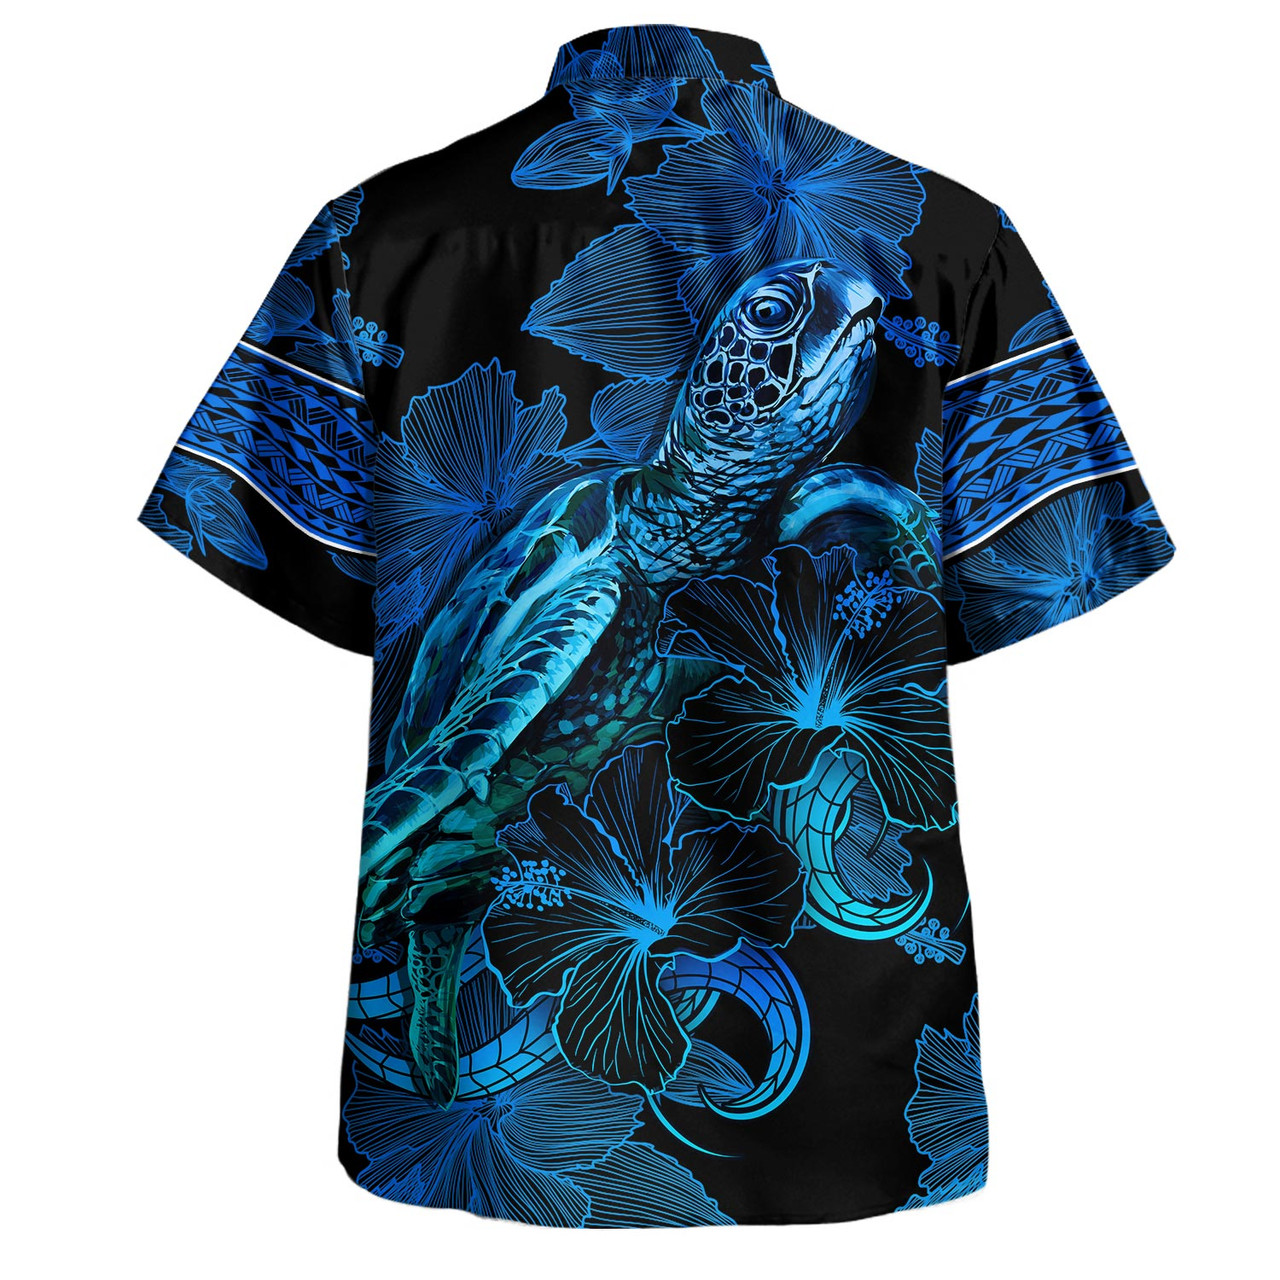 Papua New Guinea Combo Puletasi And Shirt Sea Turtle With Blooming Hibiscus Flowers Tribal Blue